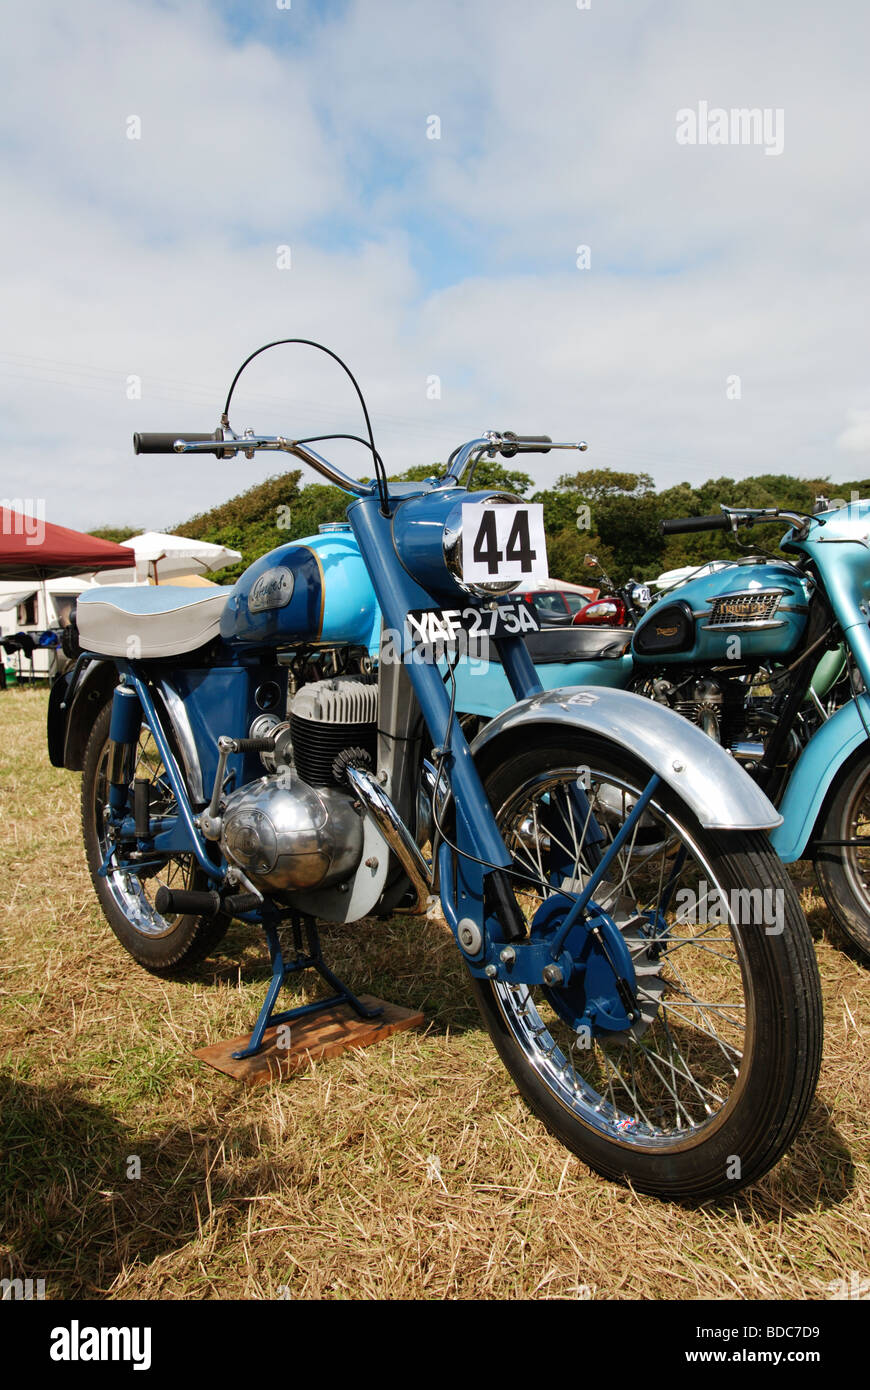 an old Greeves motorbike at a vintage motorcycle rally in cornwall, uk Stock Photo